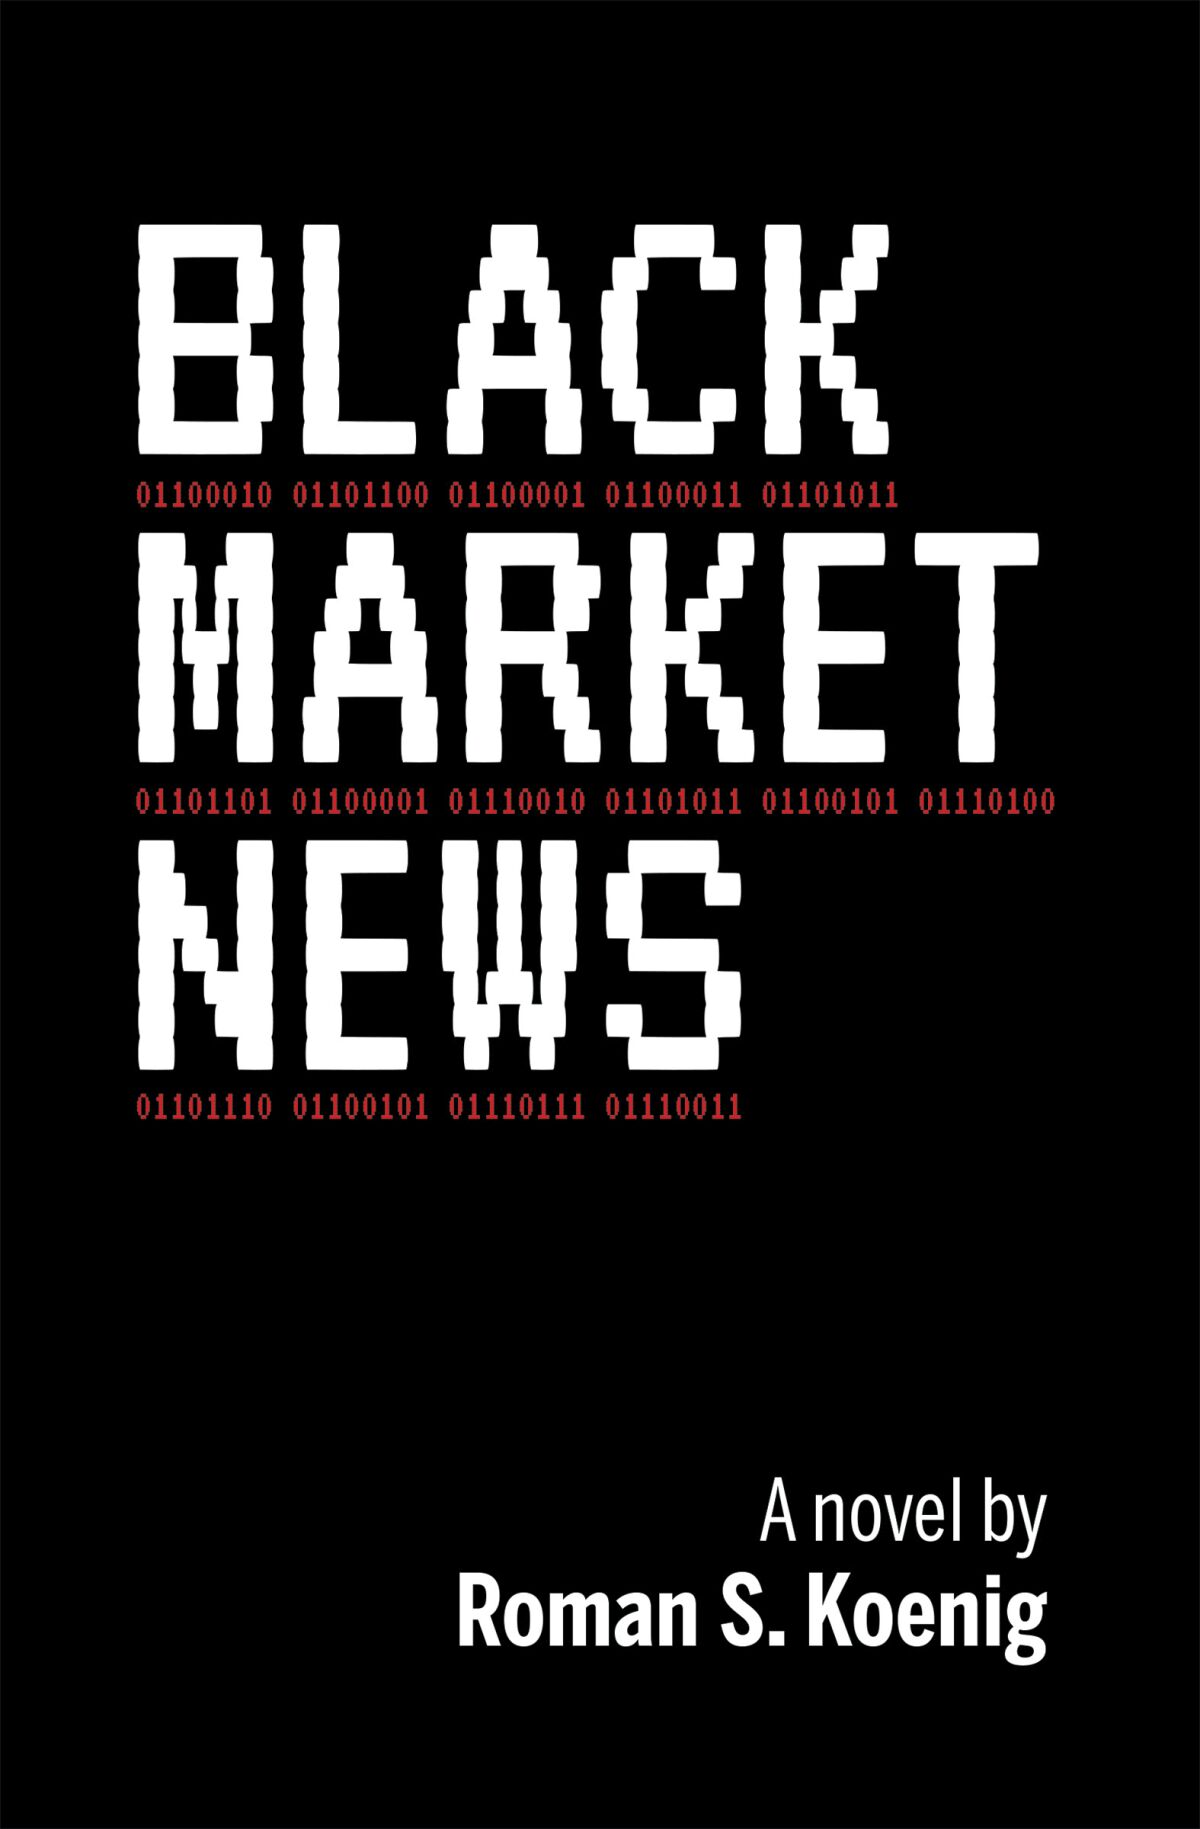 The cover of "Black Market News"